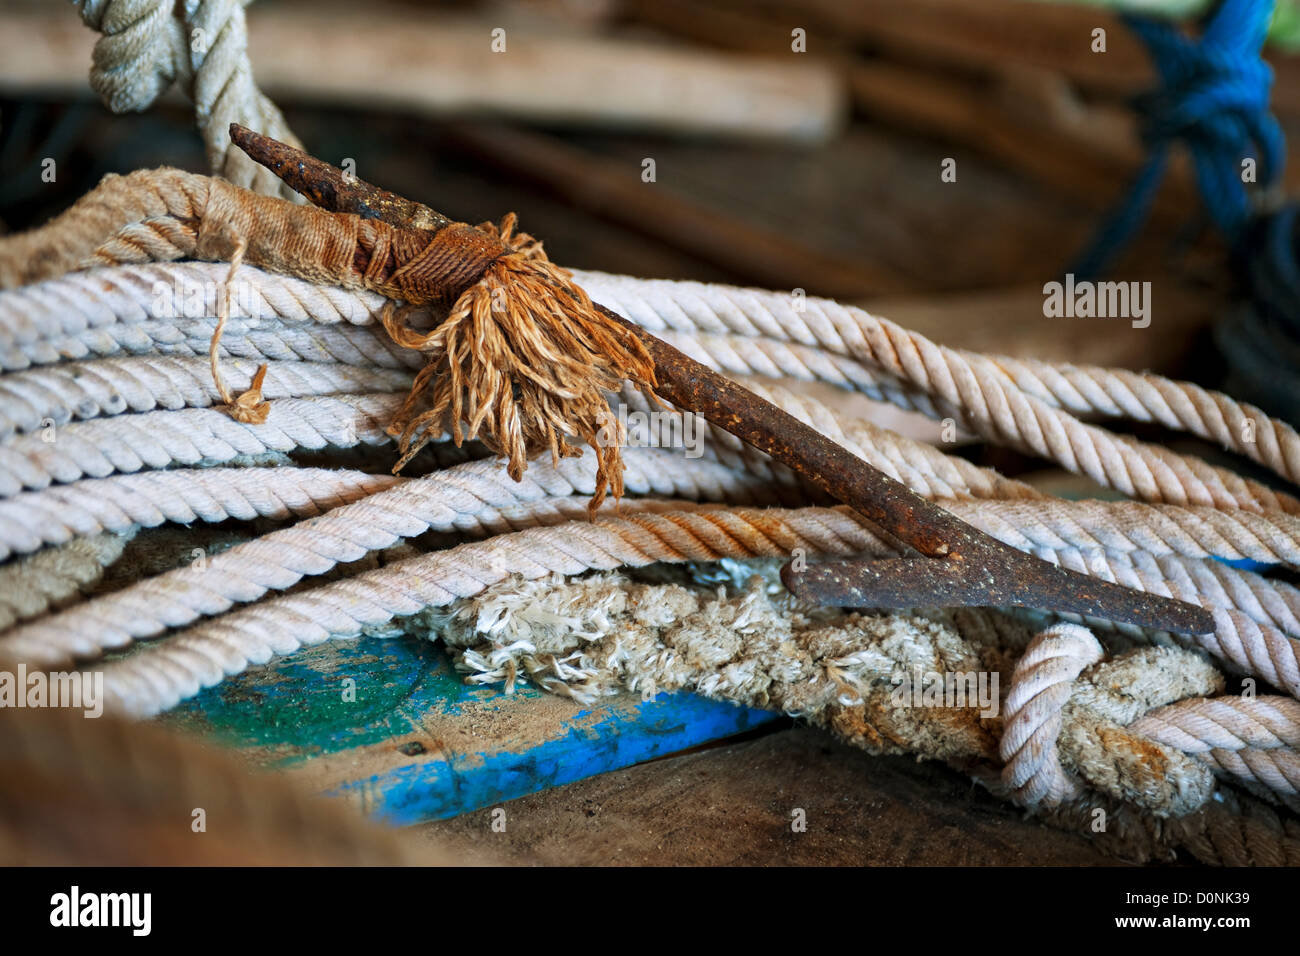 The metal speartip for traditional whaling, Lamalera, Lembata Island, Eastern Indonesia. Stock Photo